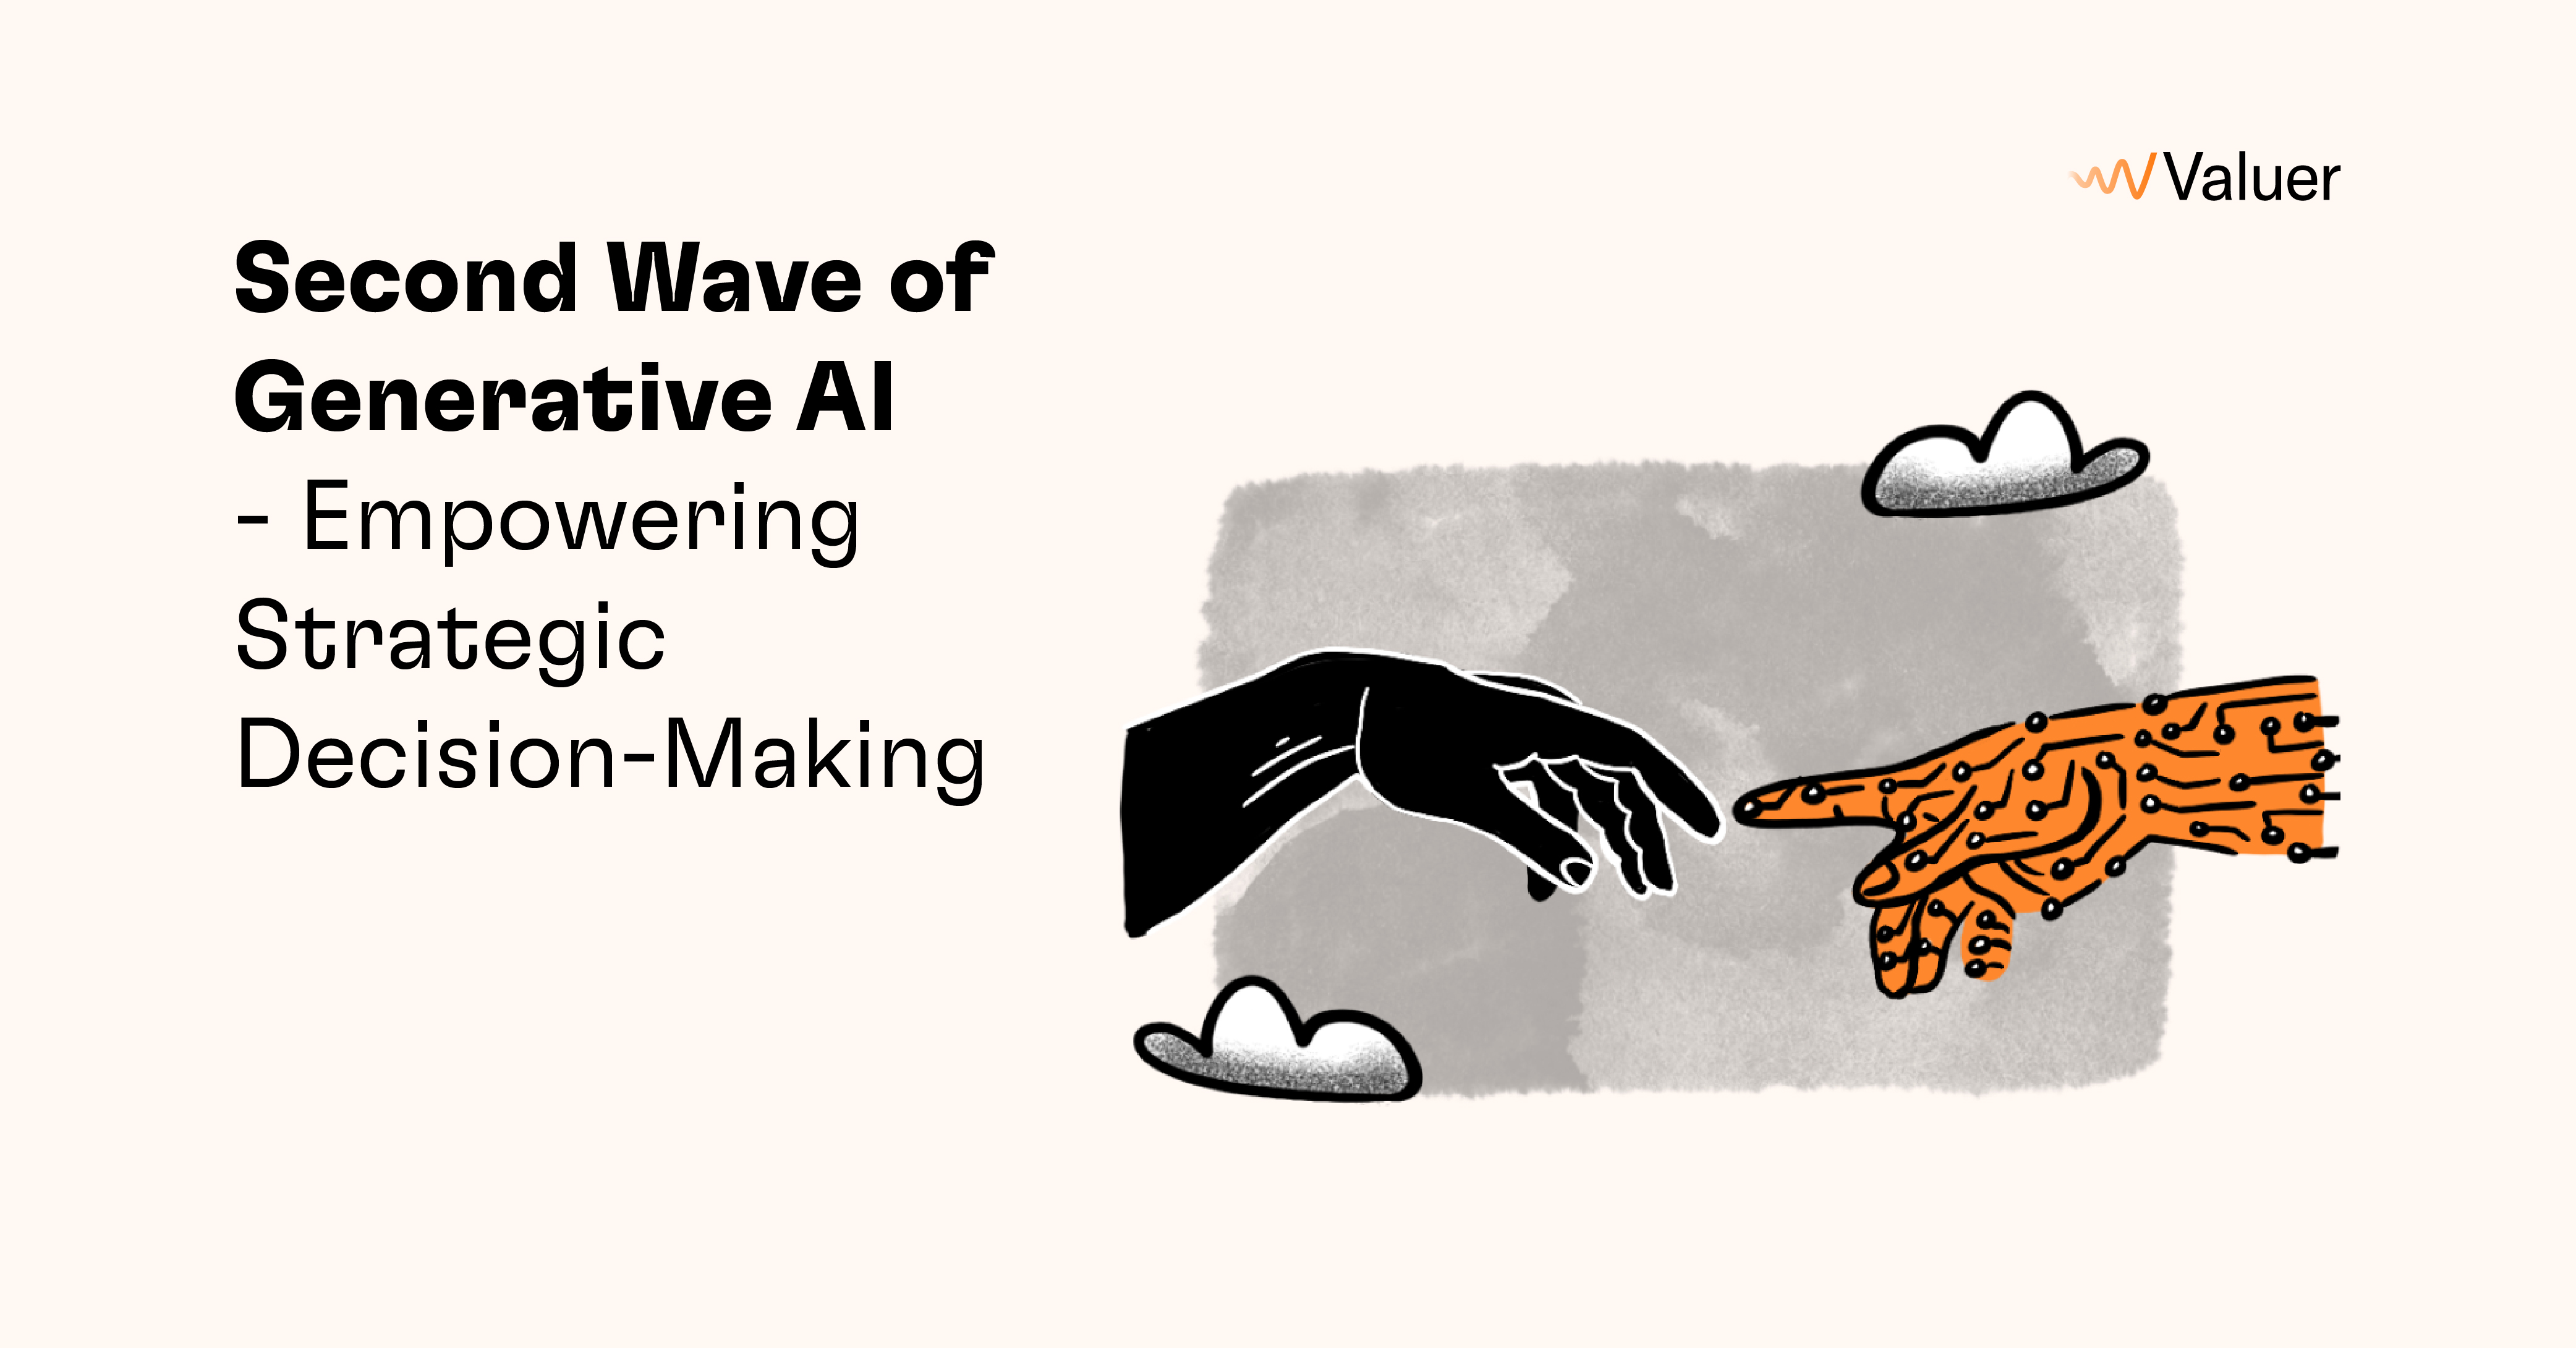 Second Wave of Generative AI - Empowering Strategic Decision-Making